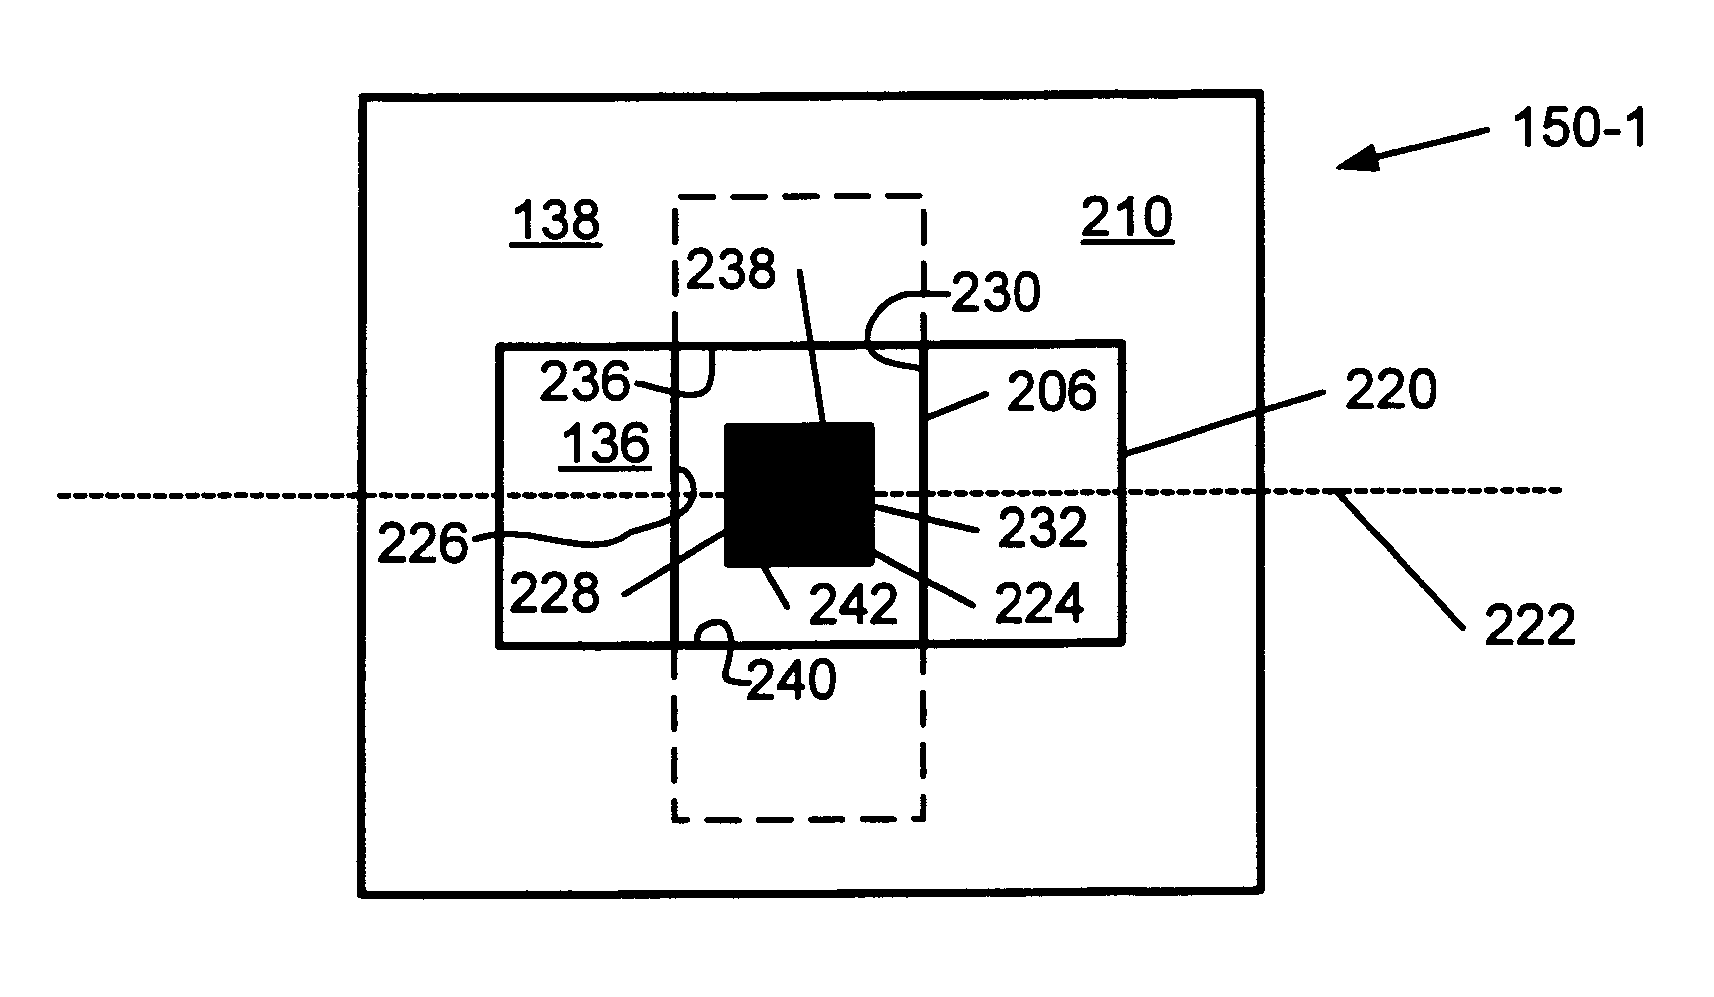 Multi-layer registration control for photolithography processes